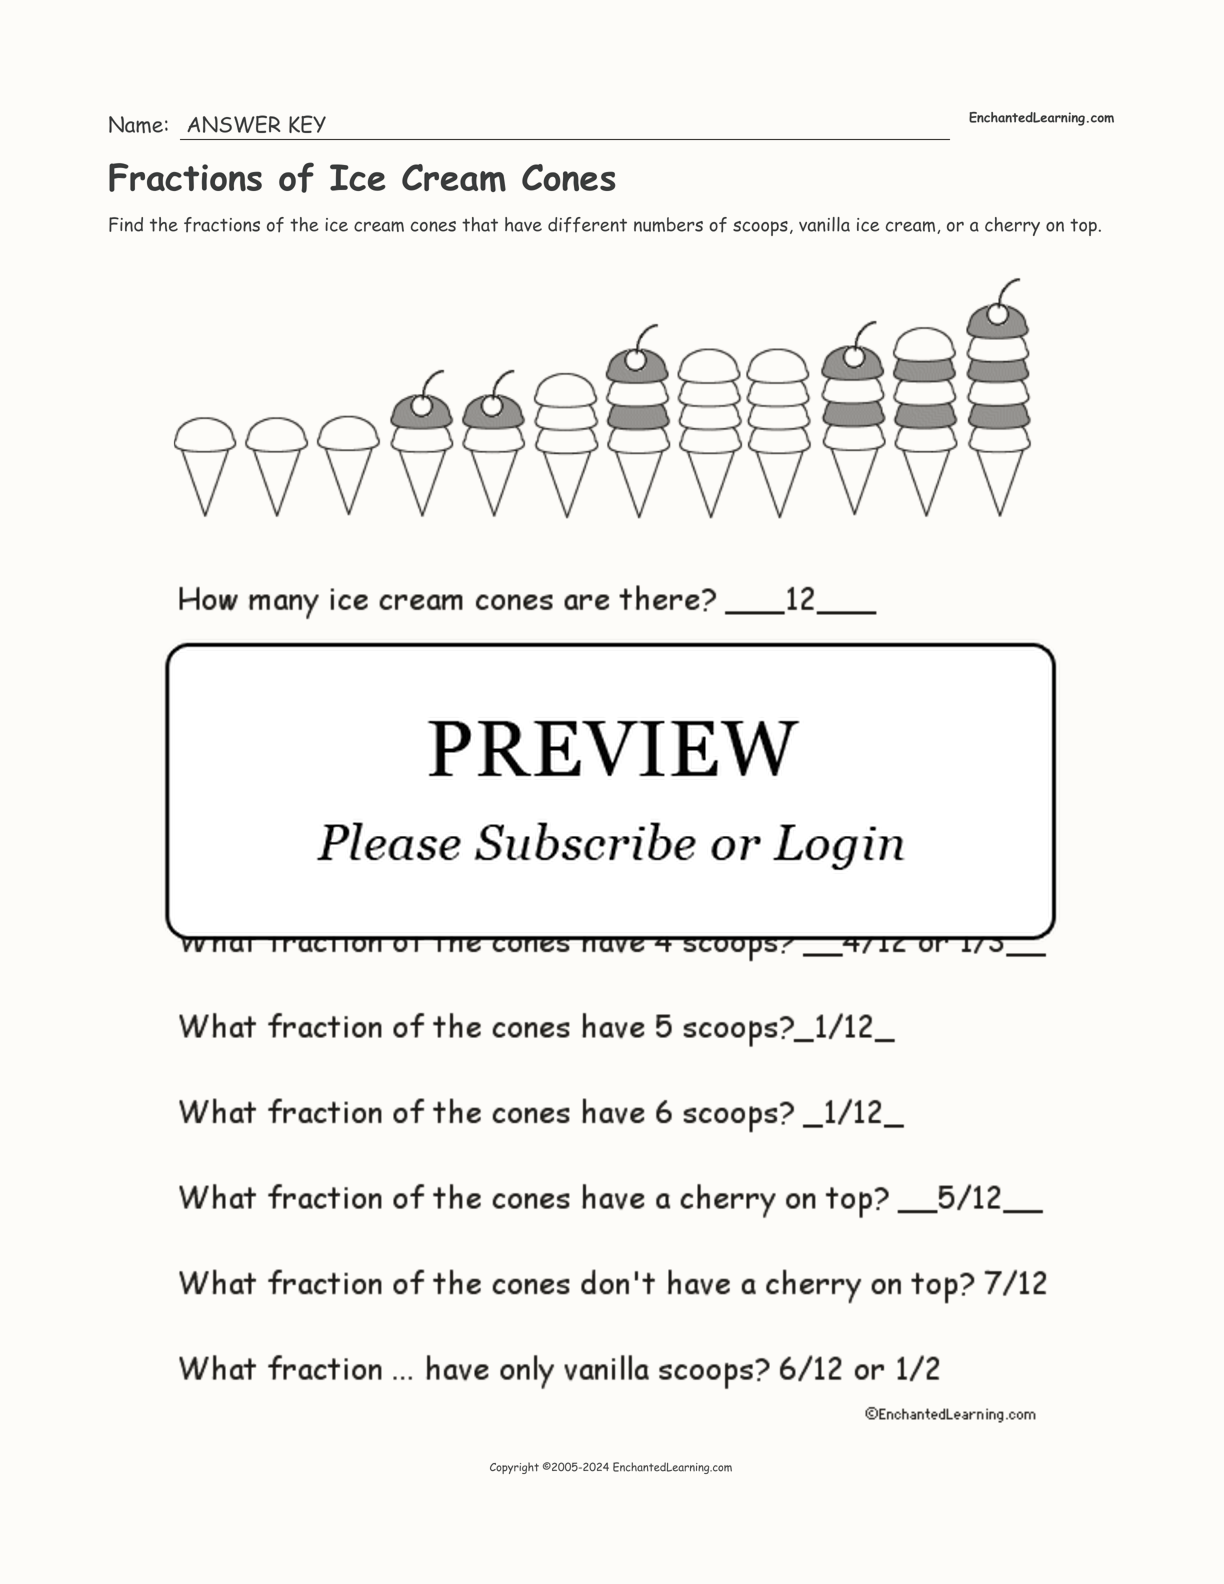 Fractions of Ice Cream Cones interactive worksheet page 2